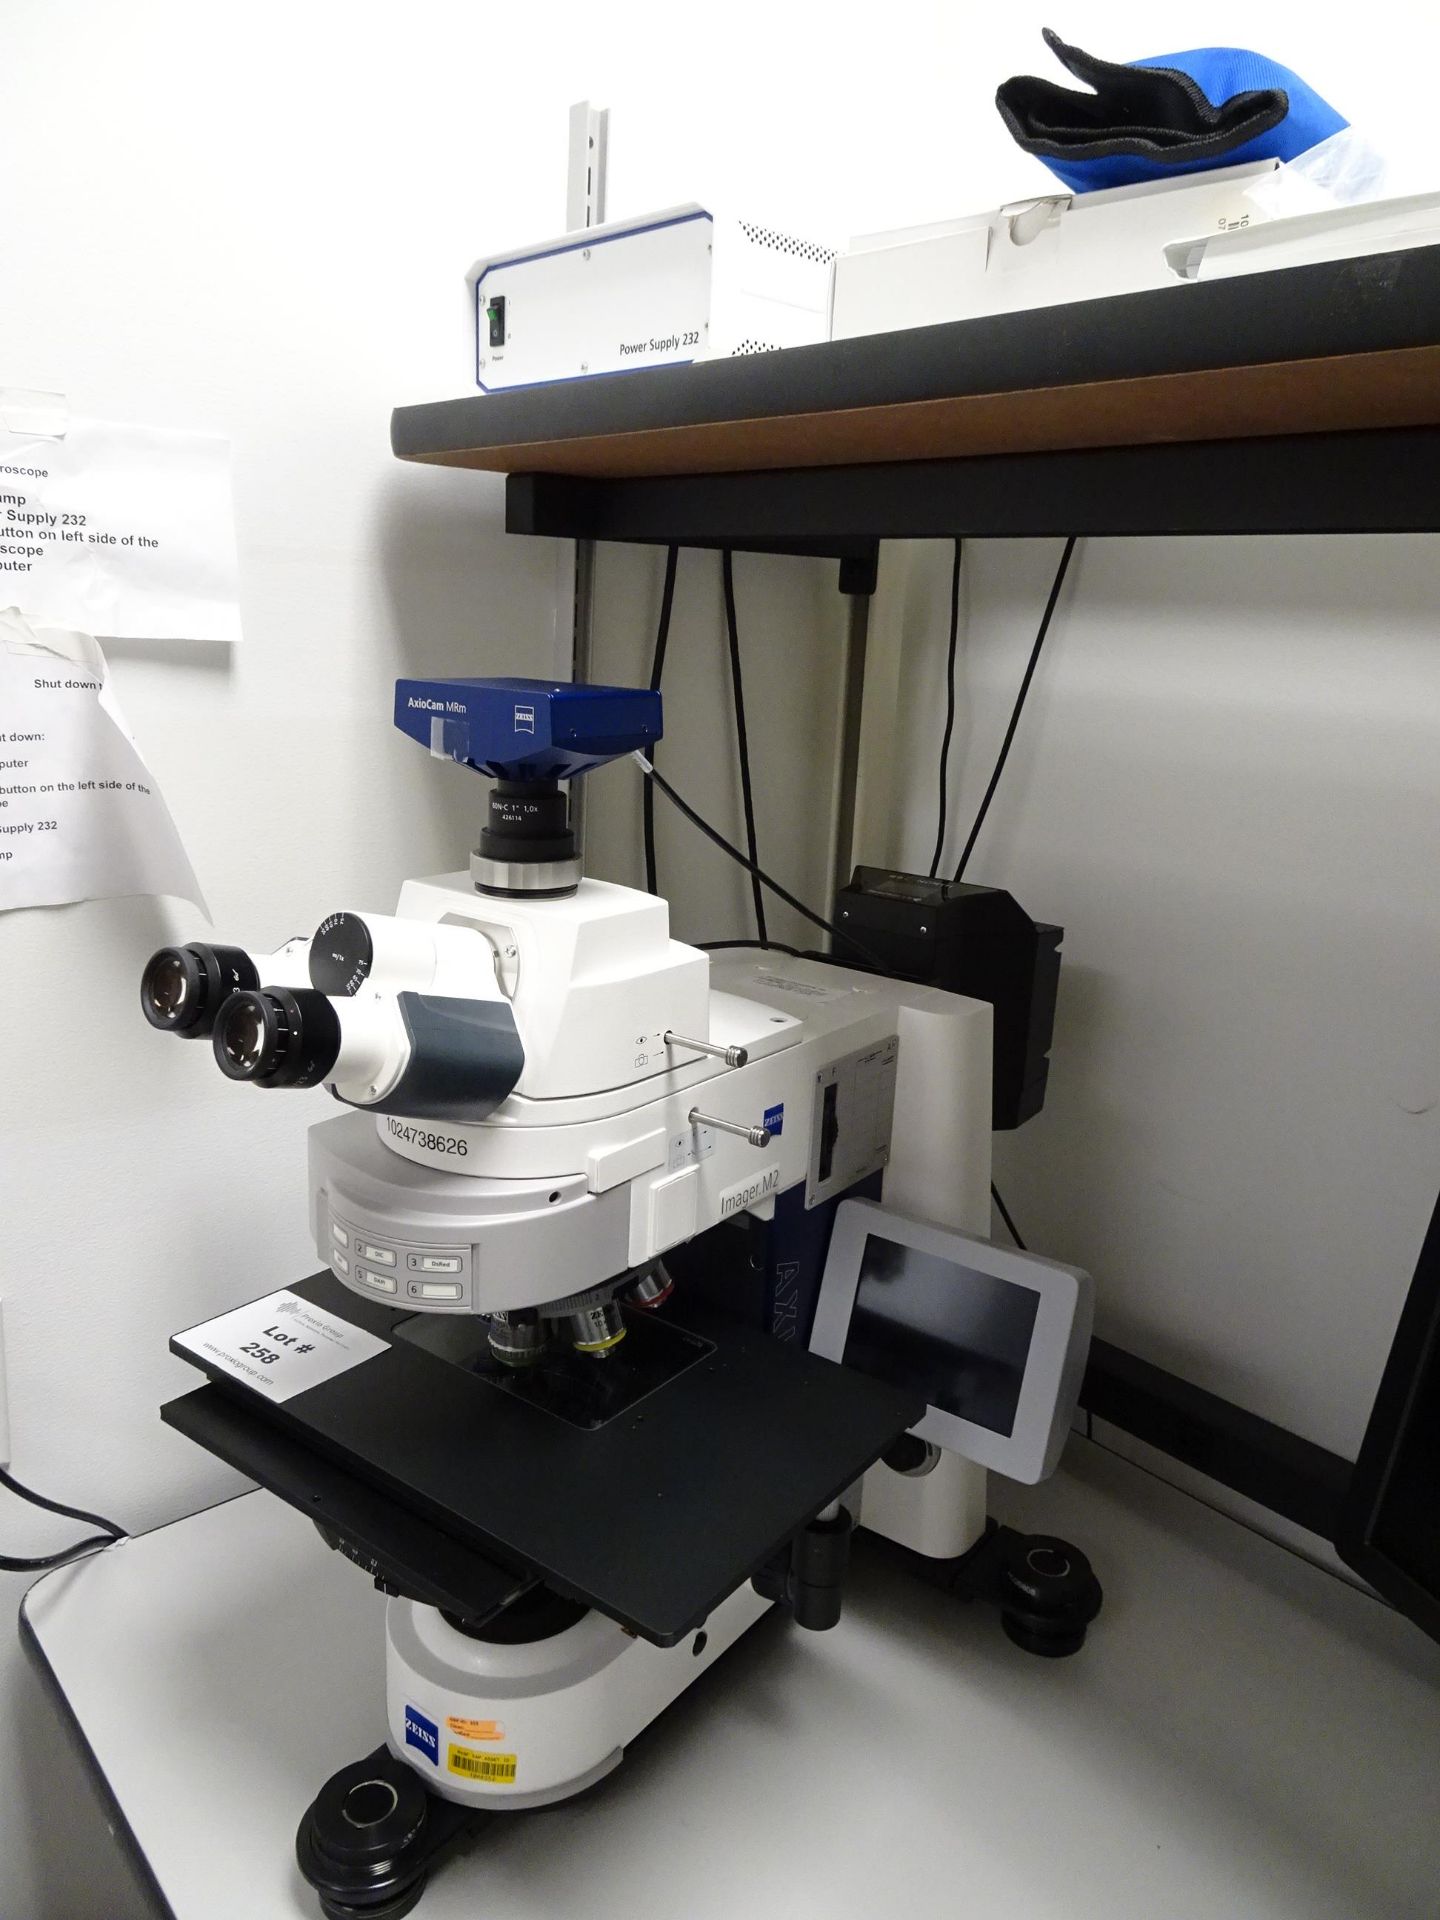 Zeiss Axio Imager.M2 Microscope With AxioCam MRM Camers With 60N-C 1" Camera Adapter, (2) 1PL 10x/23 - Image 2 of 22